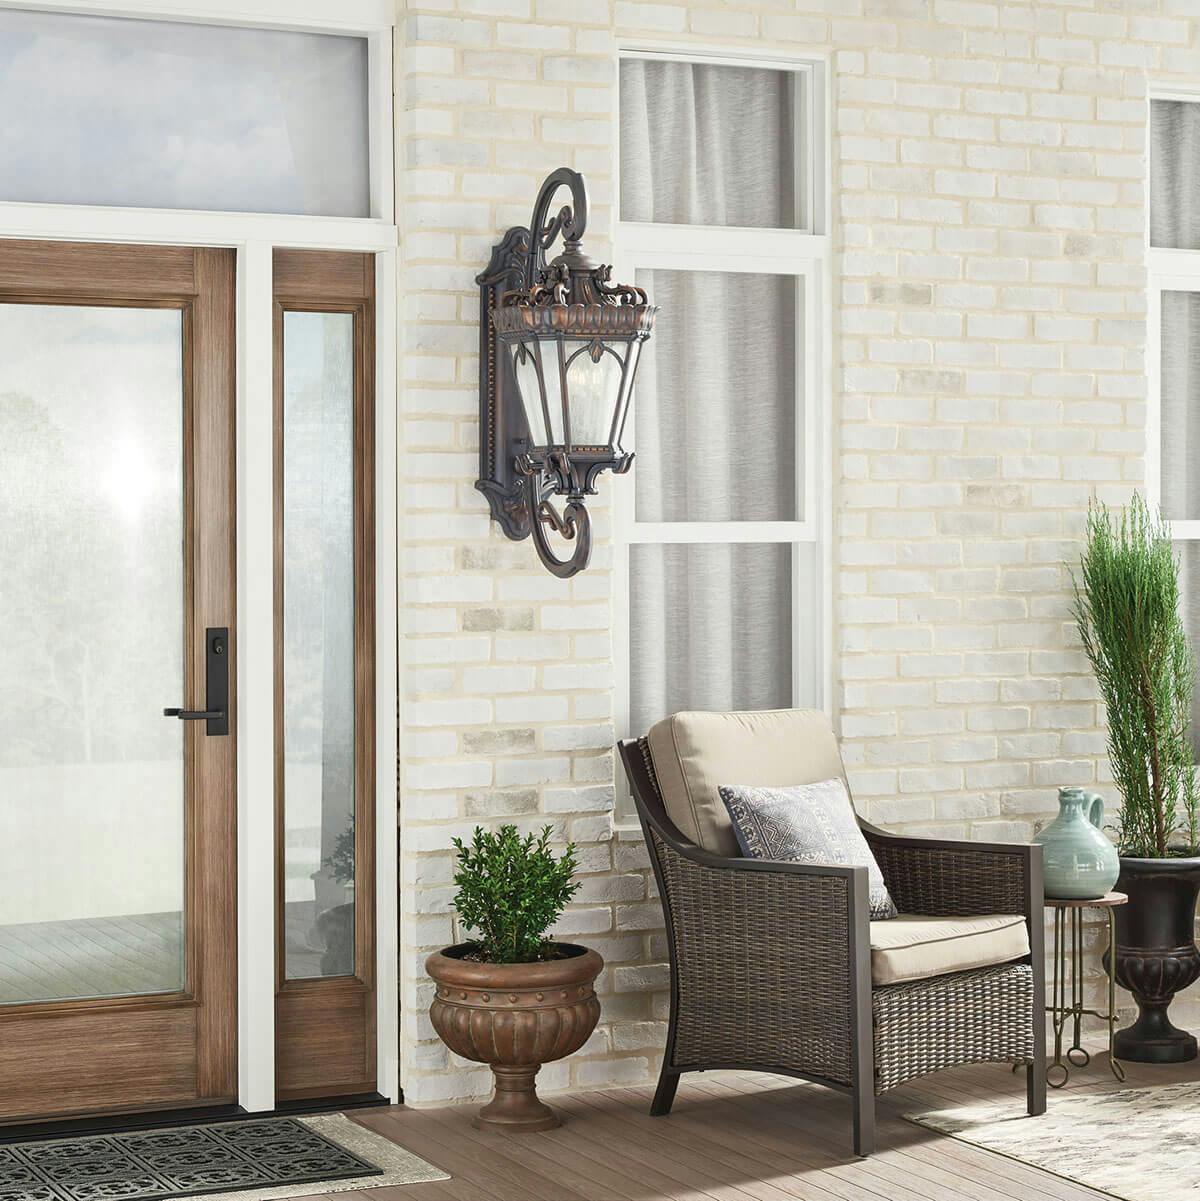 Day time Exterior image featuring Tournai outdoor wall light 9359LD